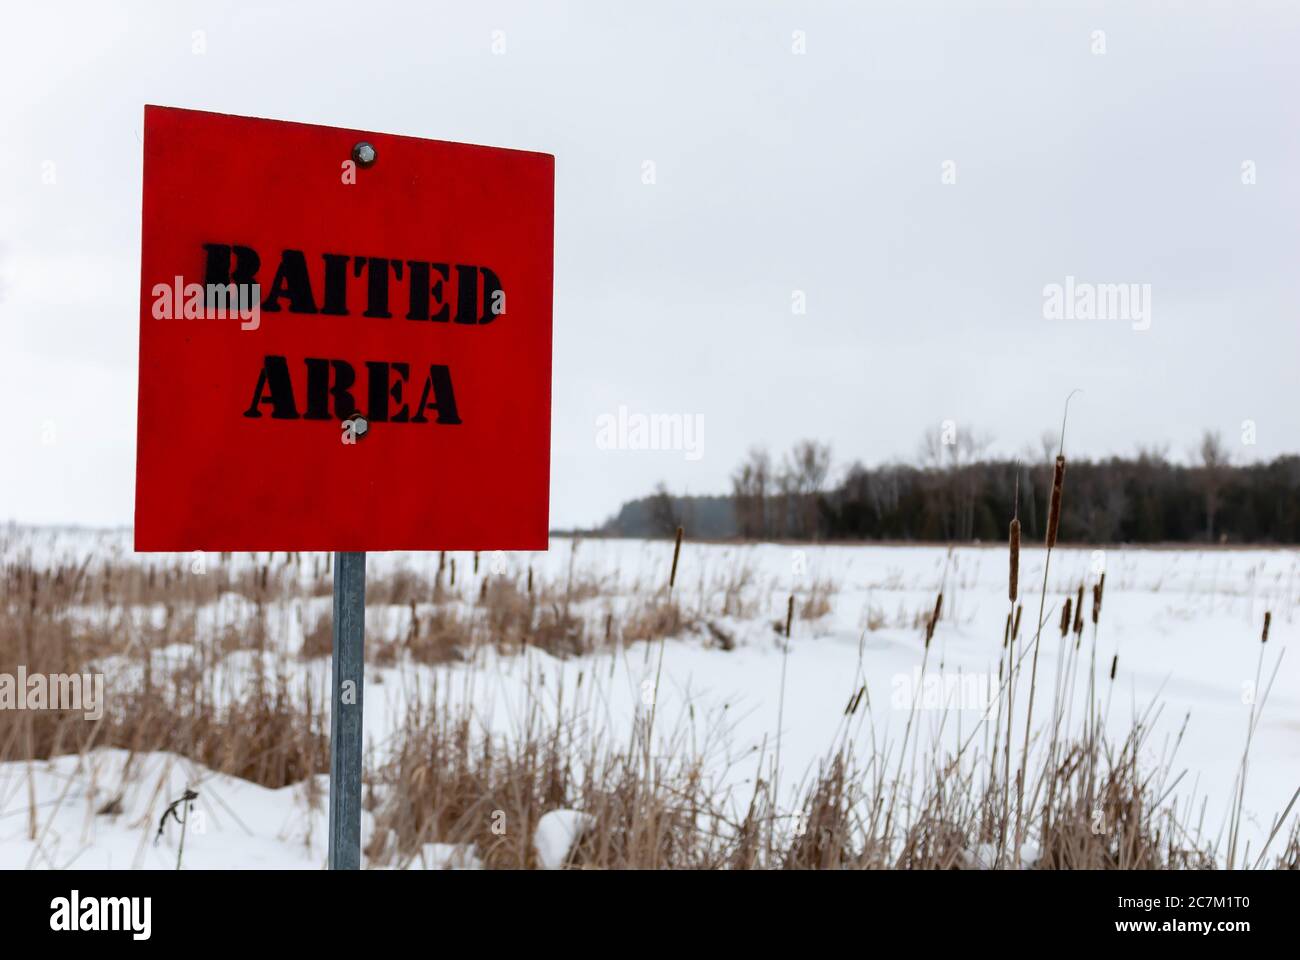 Selective focus shot of a red 'baited area' signage during winter with a blurred background Stock Photo